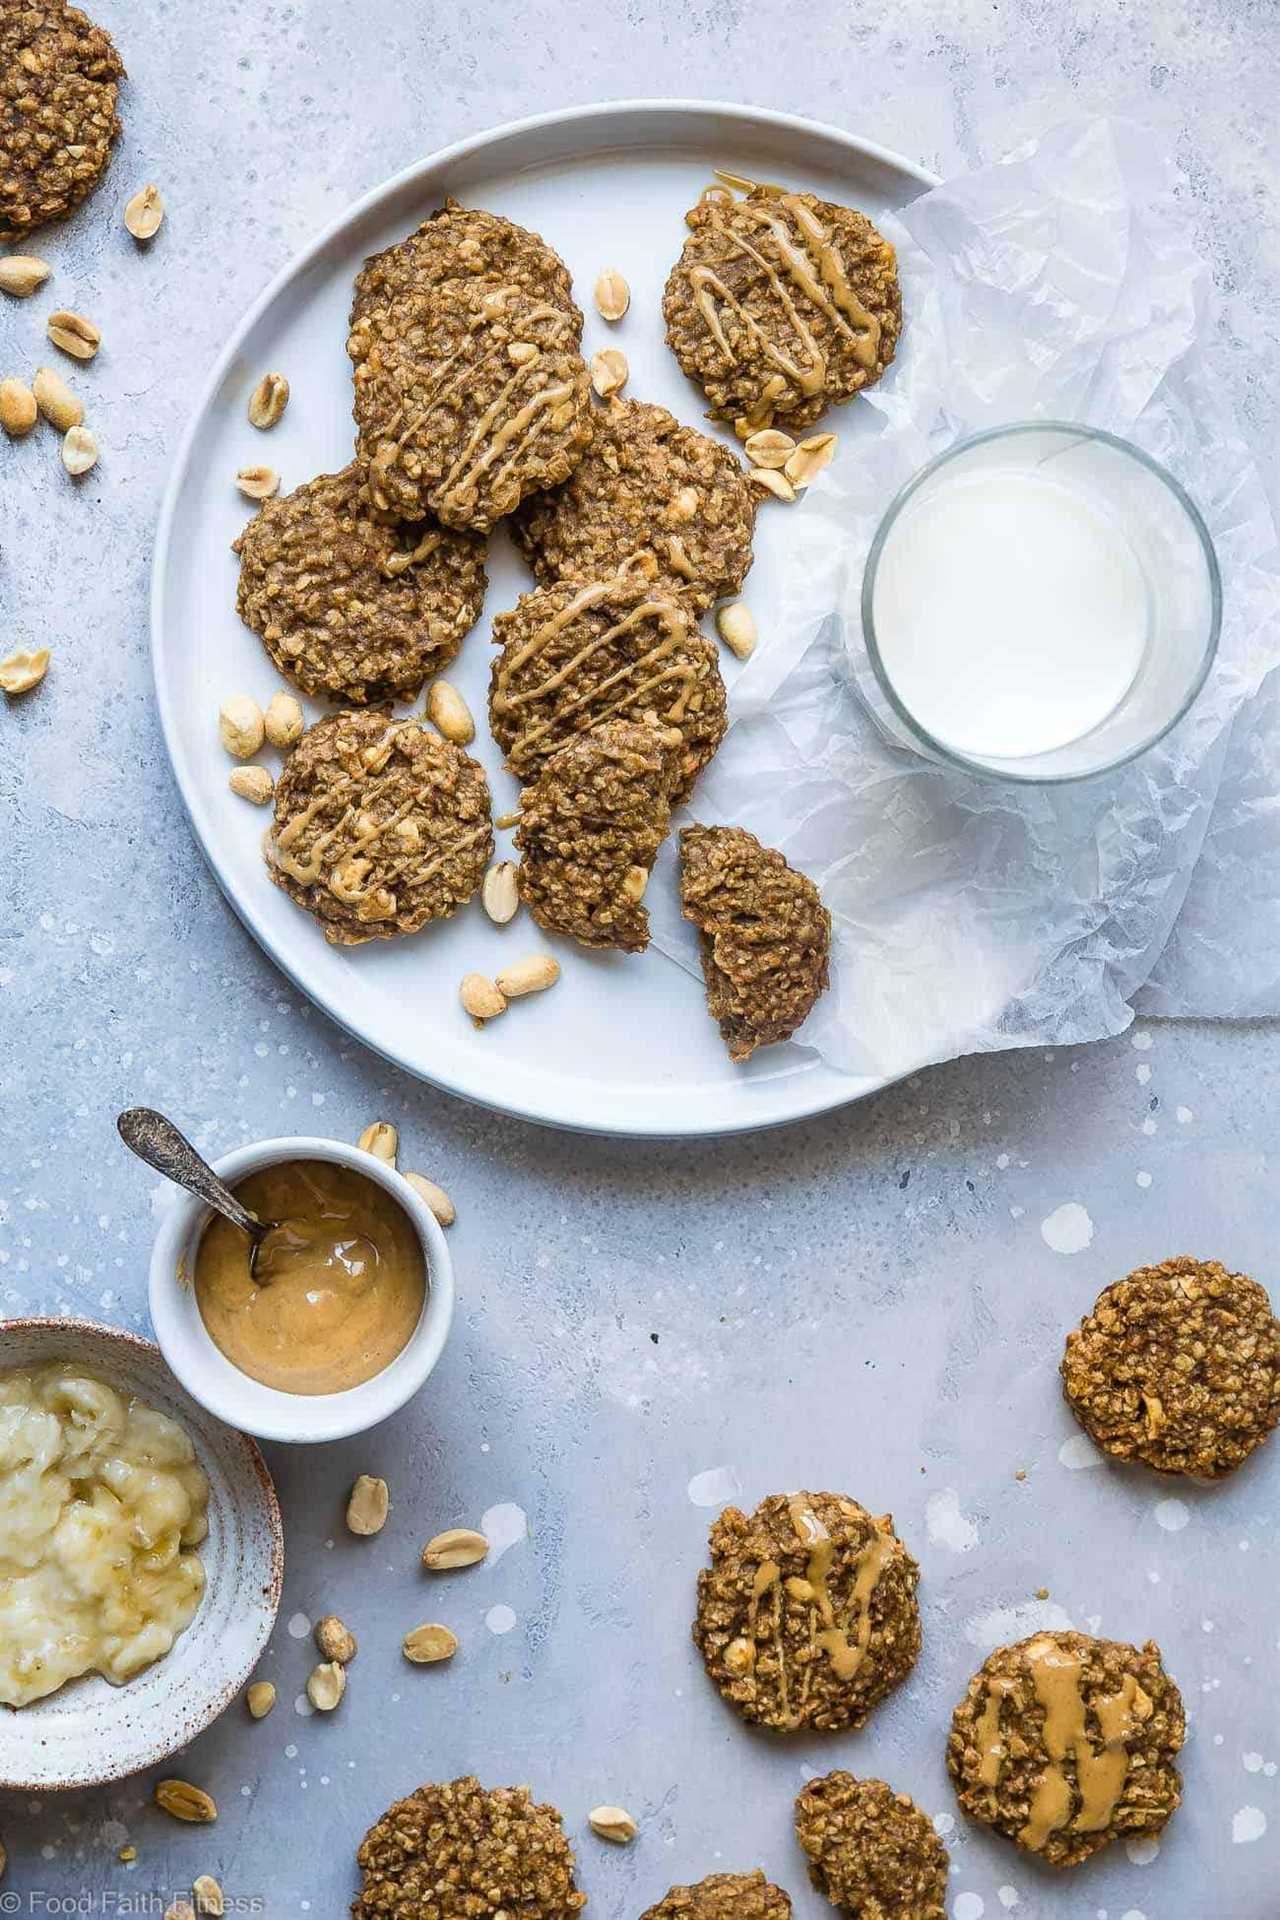 Healthy Banana Oatmeal Cookies Recipe - Ever wondered how to make banana oatmeal cookies? These gluten free oatmeal cookies use only 5 simple ingredients and are dairy free and vegan friendly! A healthy treat for kids and adults that can be a breakfast or snack! | Foodfaithfitness.com | @FoodFaithFit